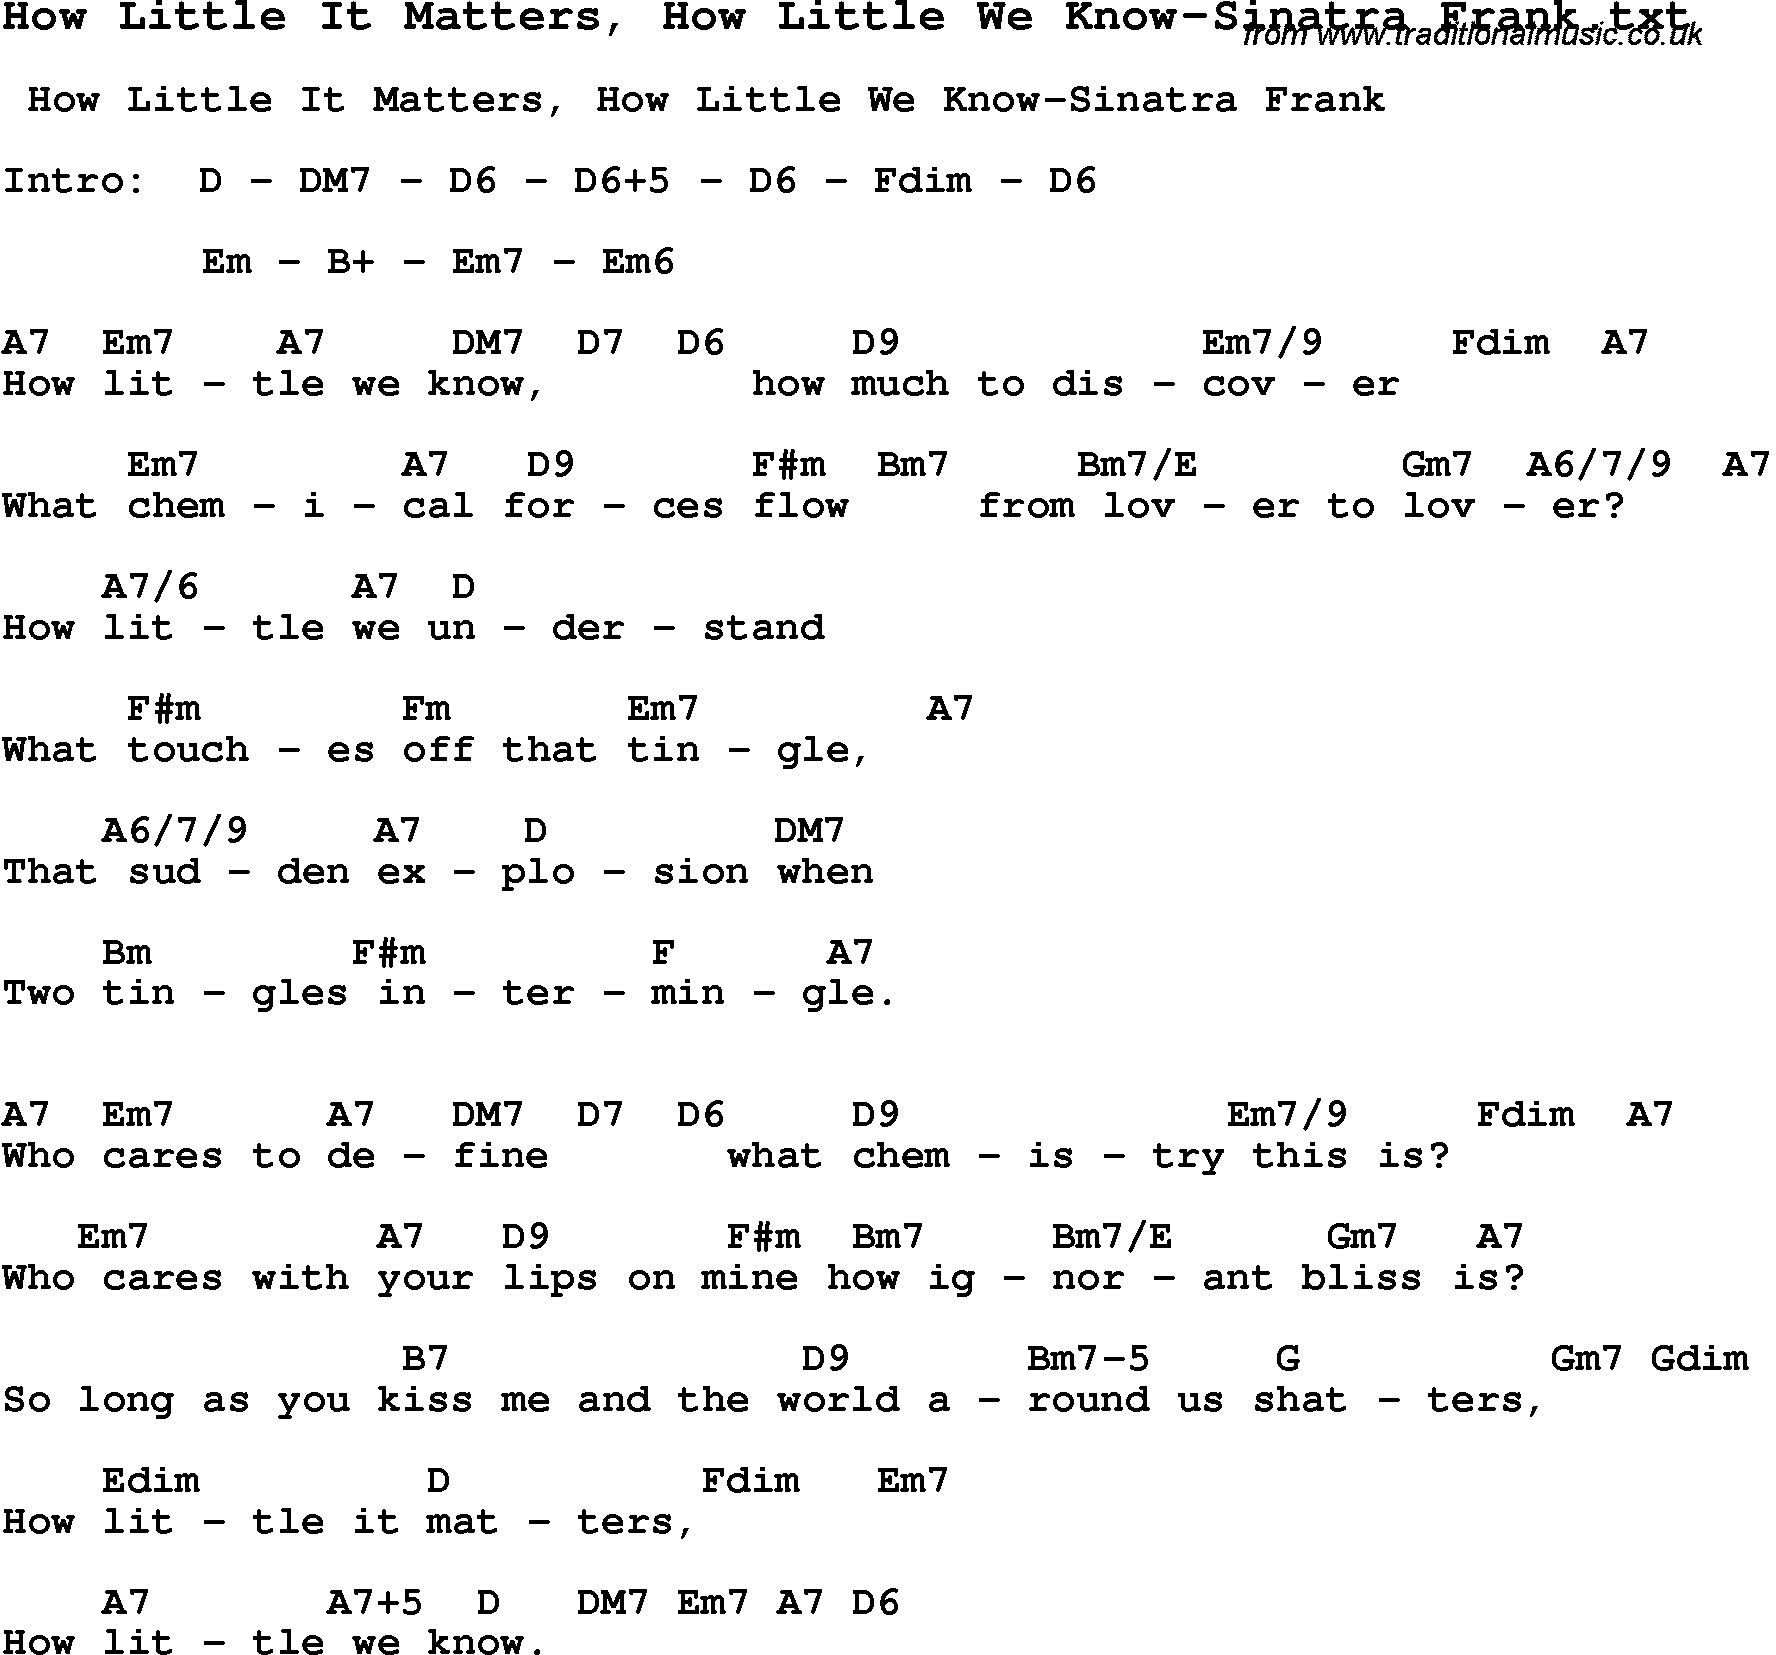 Jazz Song from top bands and vocal artists with chords, tabs and lyrics - How Little It Matters, How Little We Know-Sinatra Frank